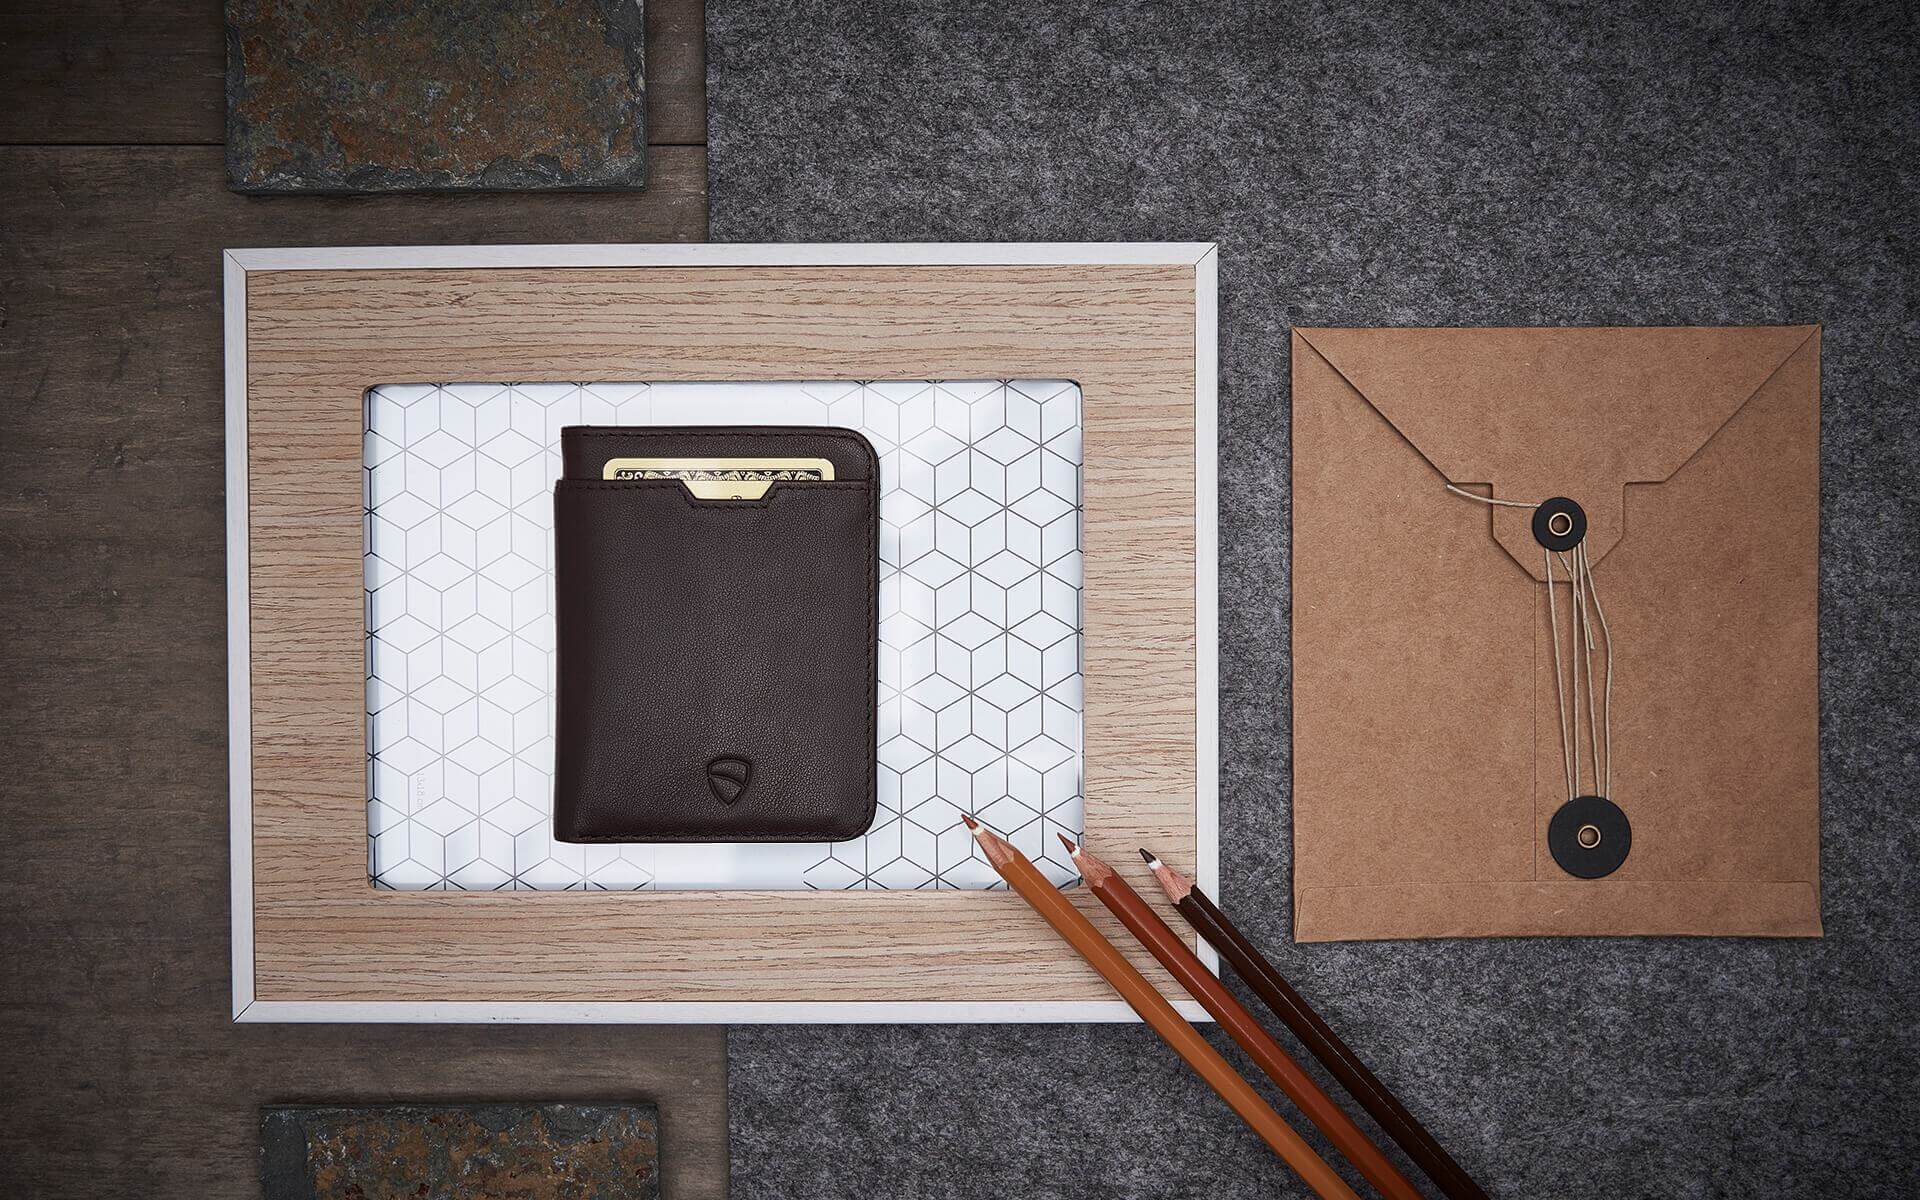 Showcase of Vaultskin CITY brown leather wallet, highlighting its slim, minimalist design perfect for the style-conscious user